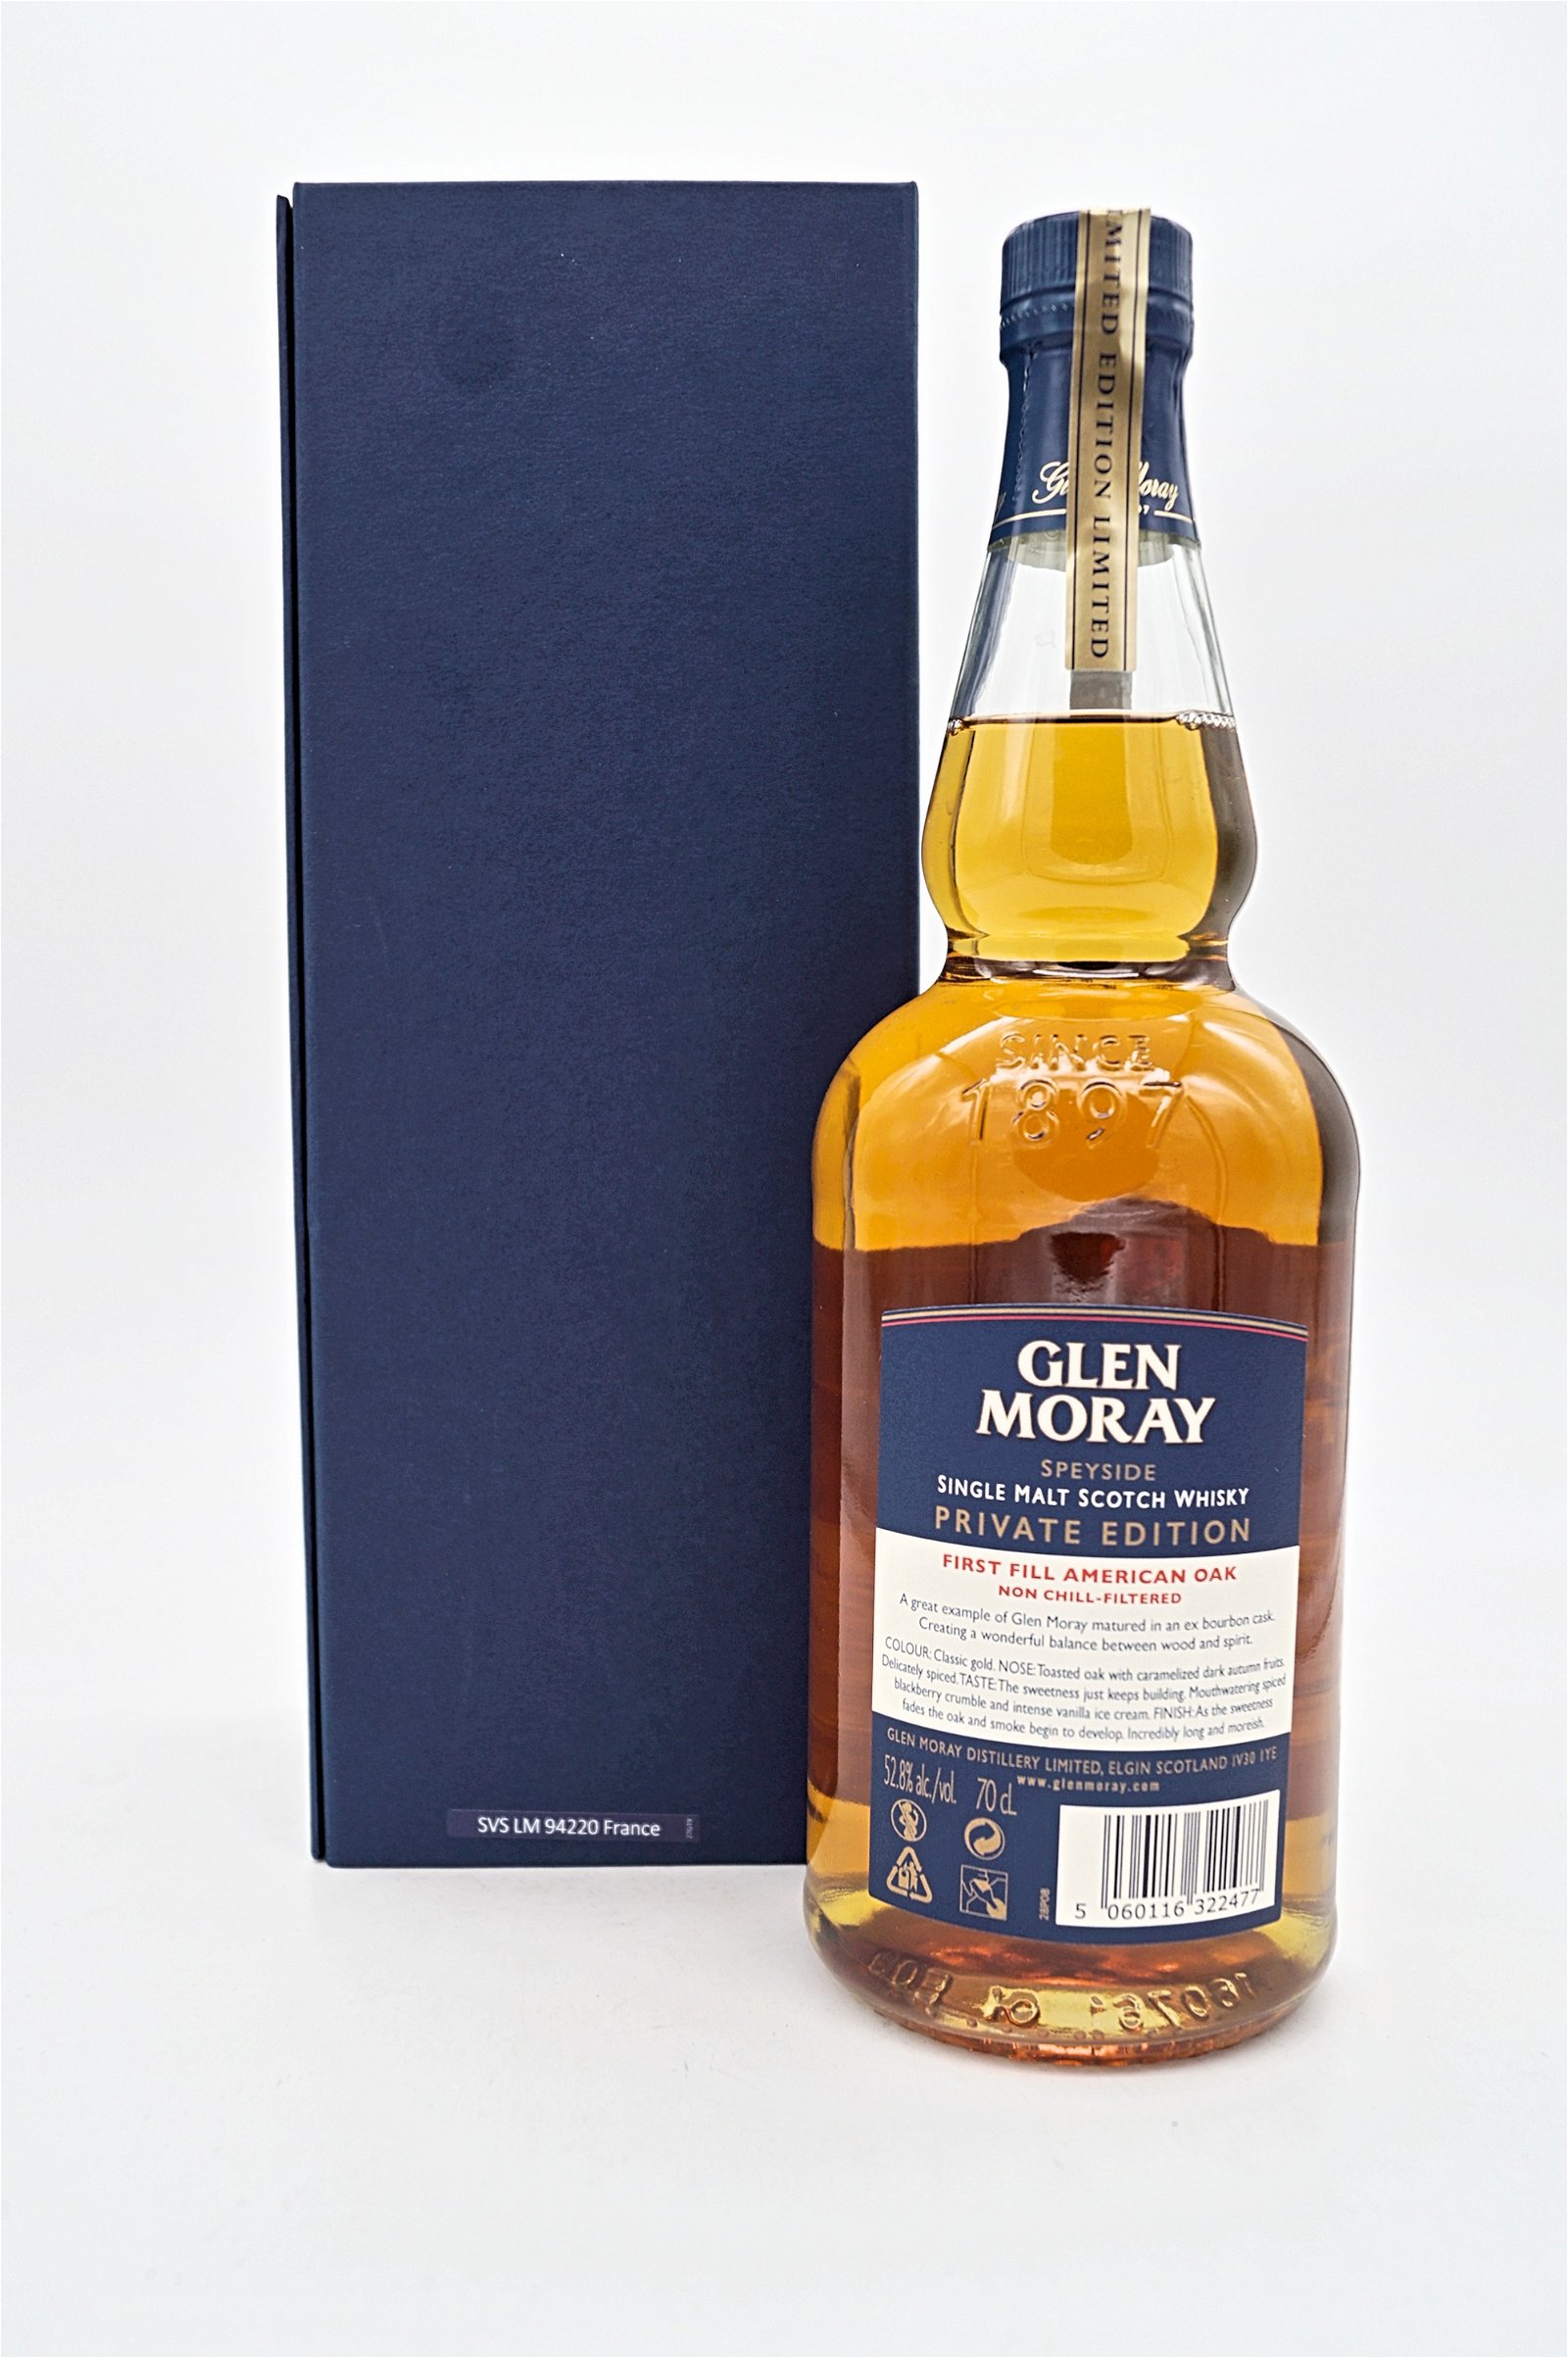 Glen Moray Private Edition 1994 First Fill American Oak #4946 Master Distillers Selection